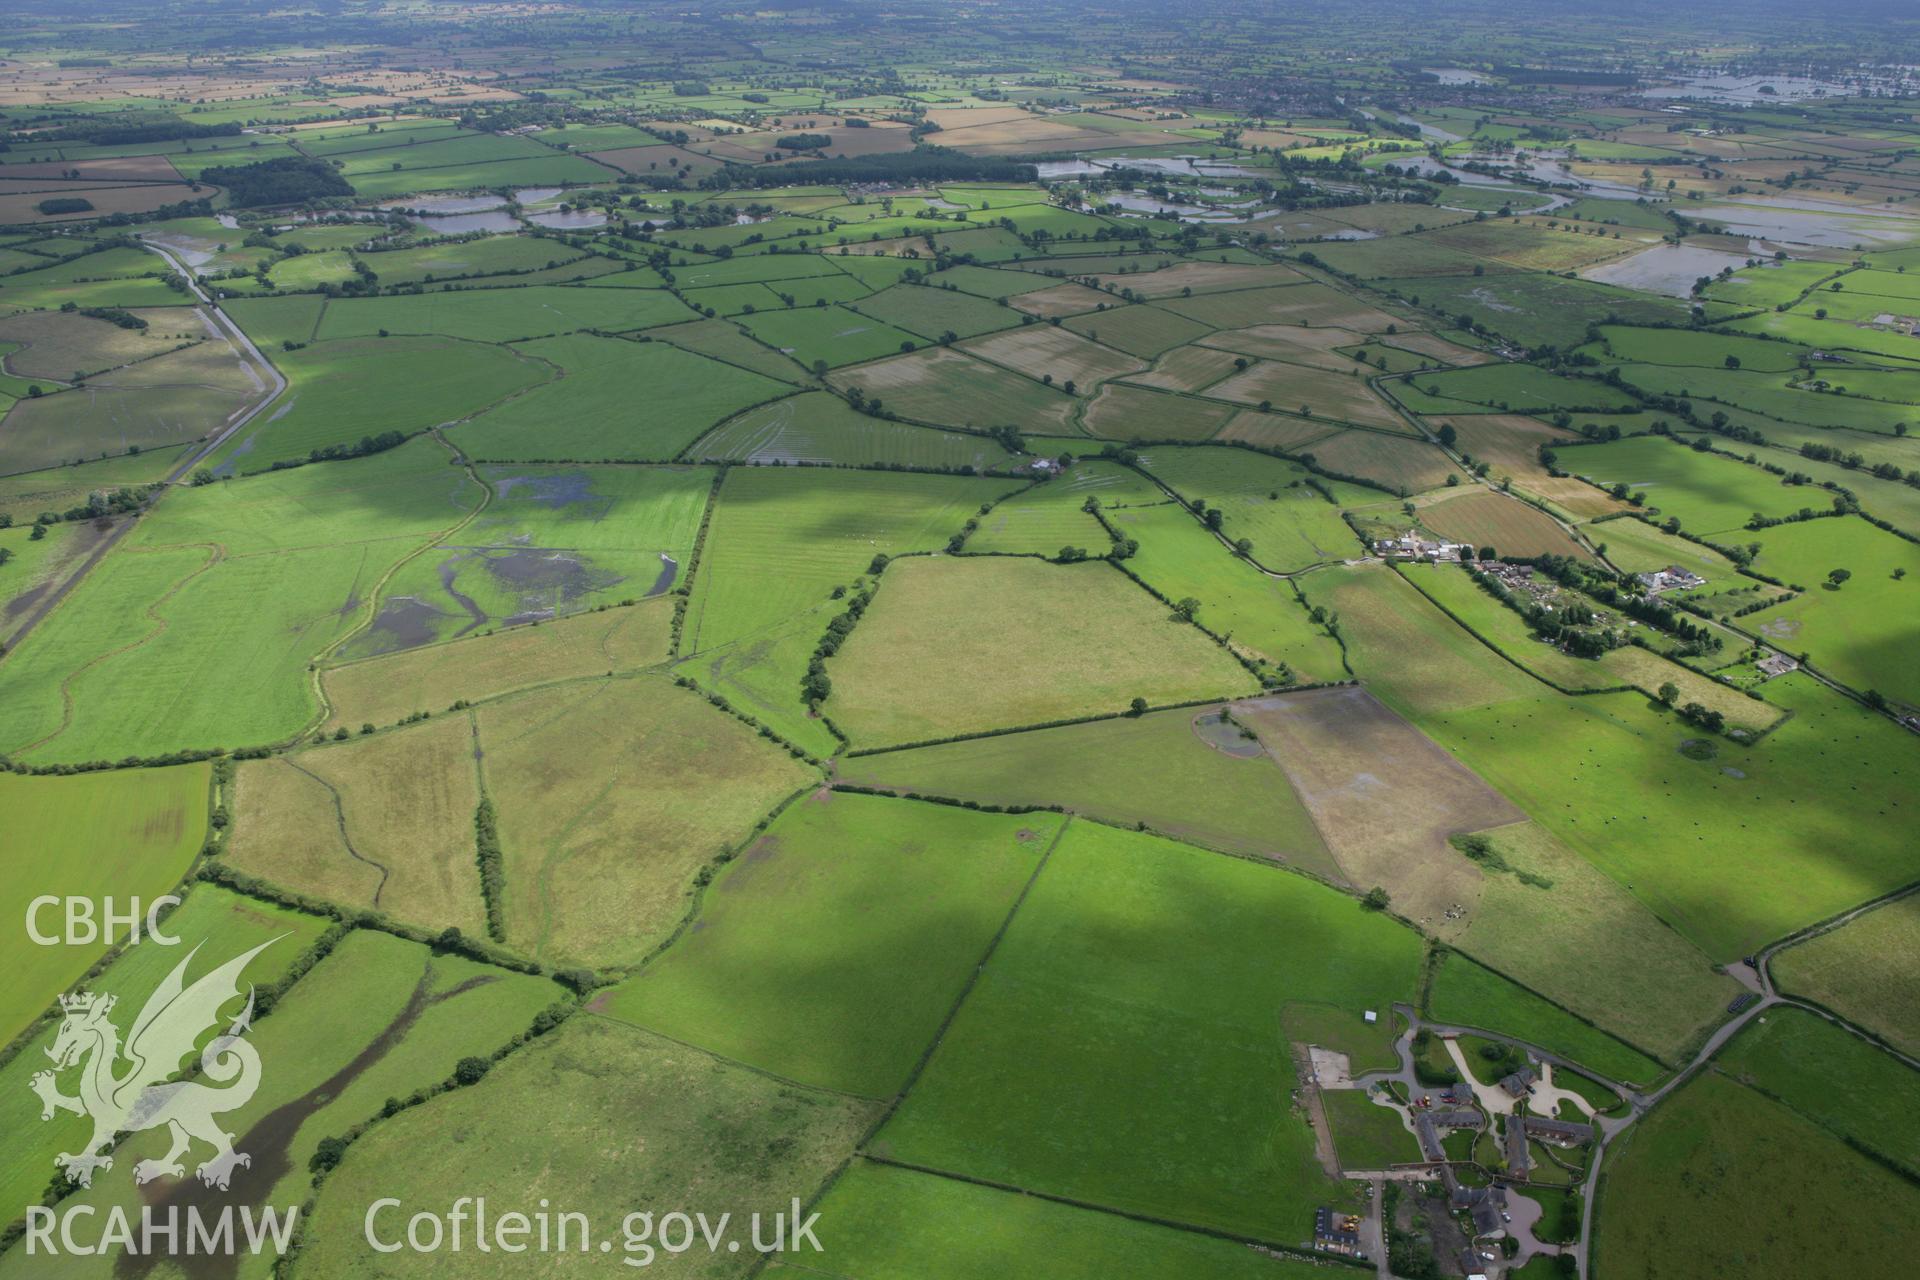 RCAHMW colour oblique aerial photograph of the location of the hoard found at Trevalyn Farm. Taken on 24 July 2007 by Toby Driver